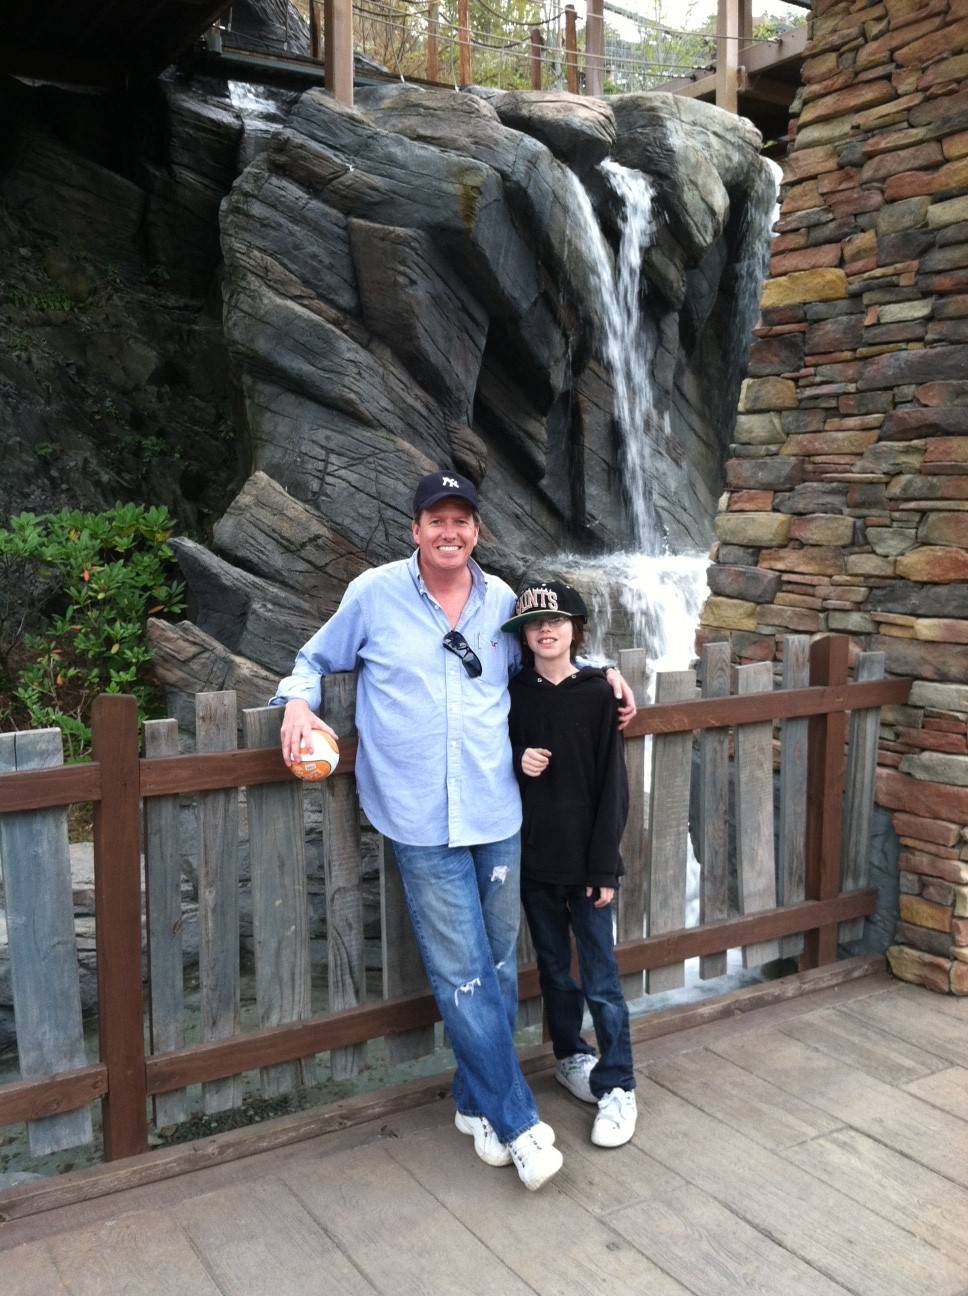 Garner with cousin Chase at Dollywood. Sevierville, Tennessee. October 2012